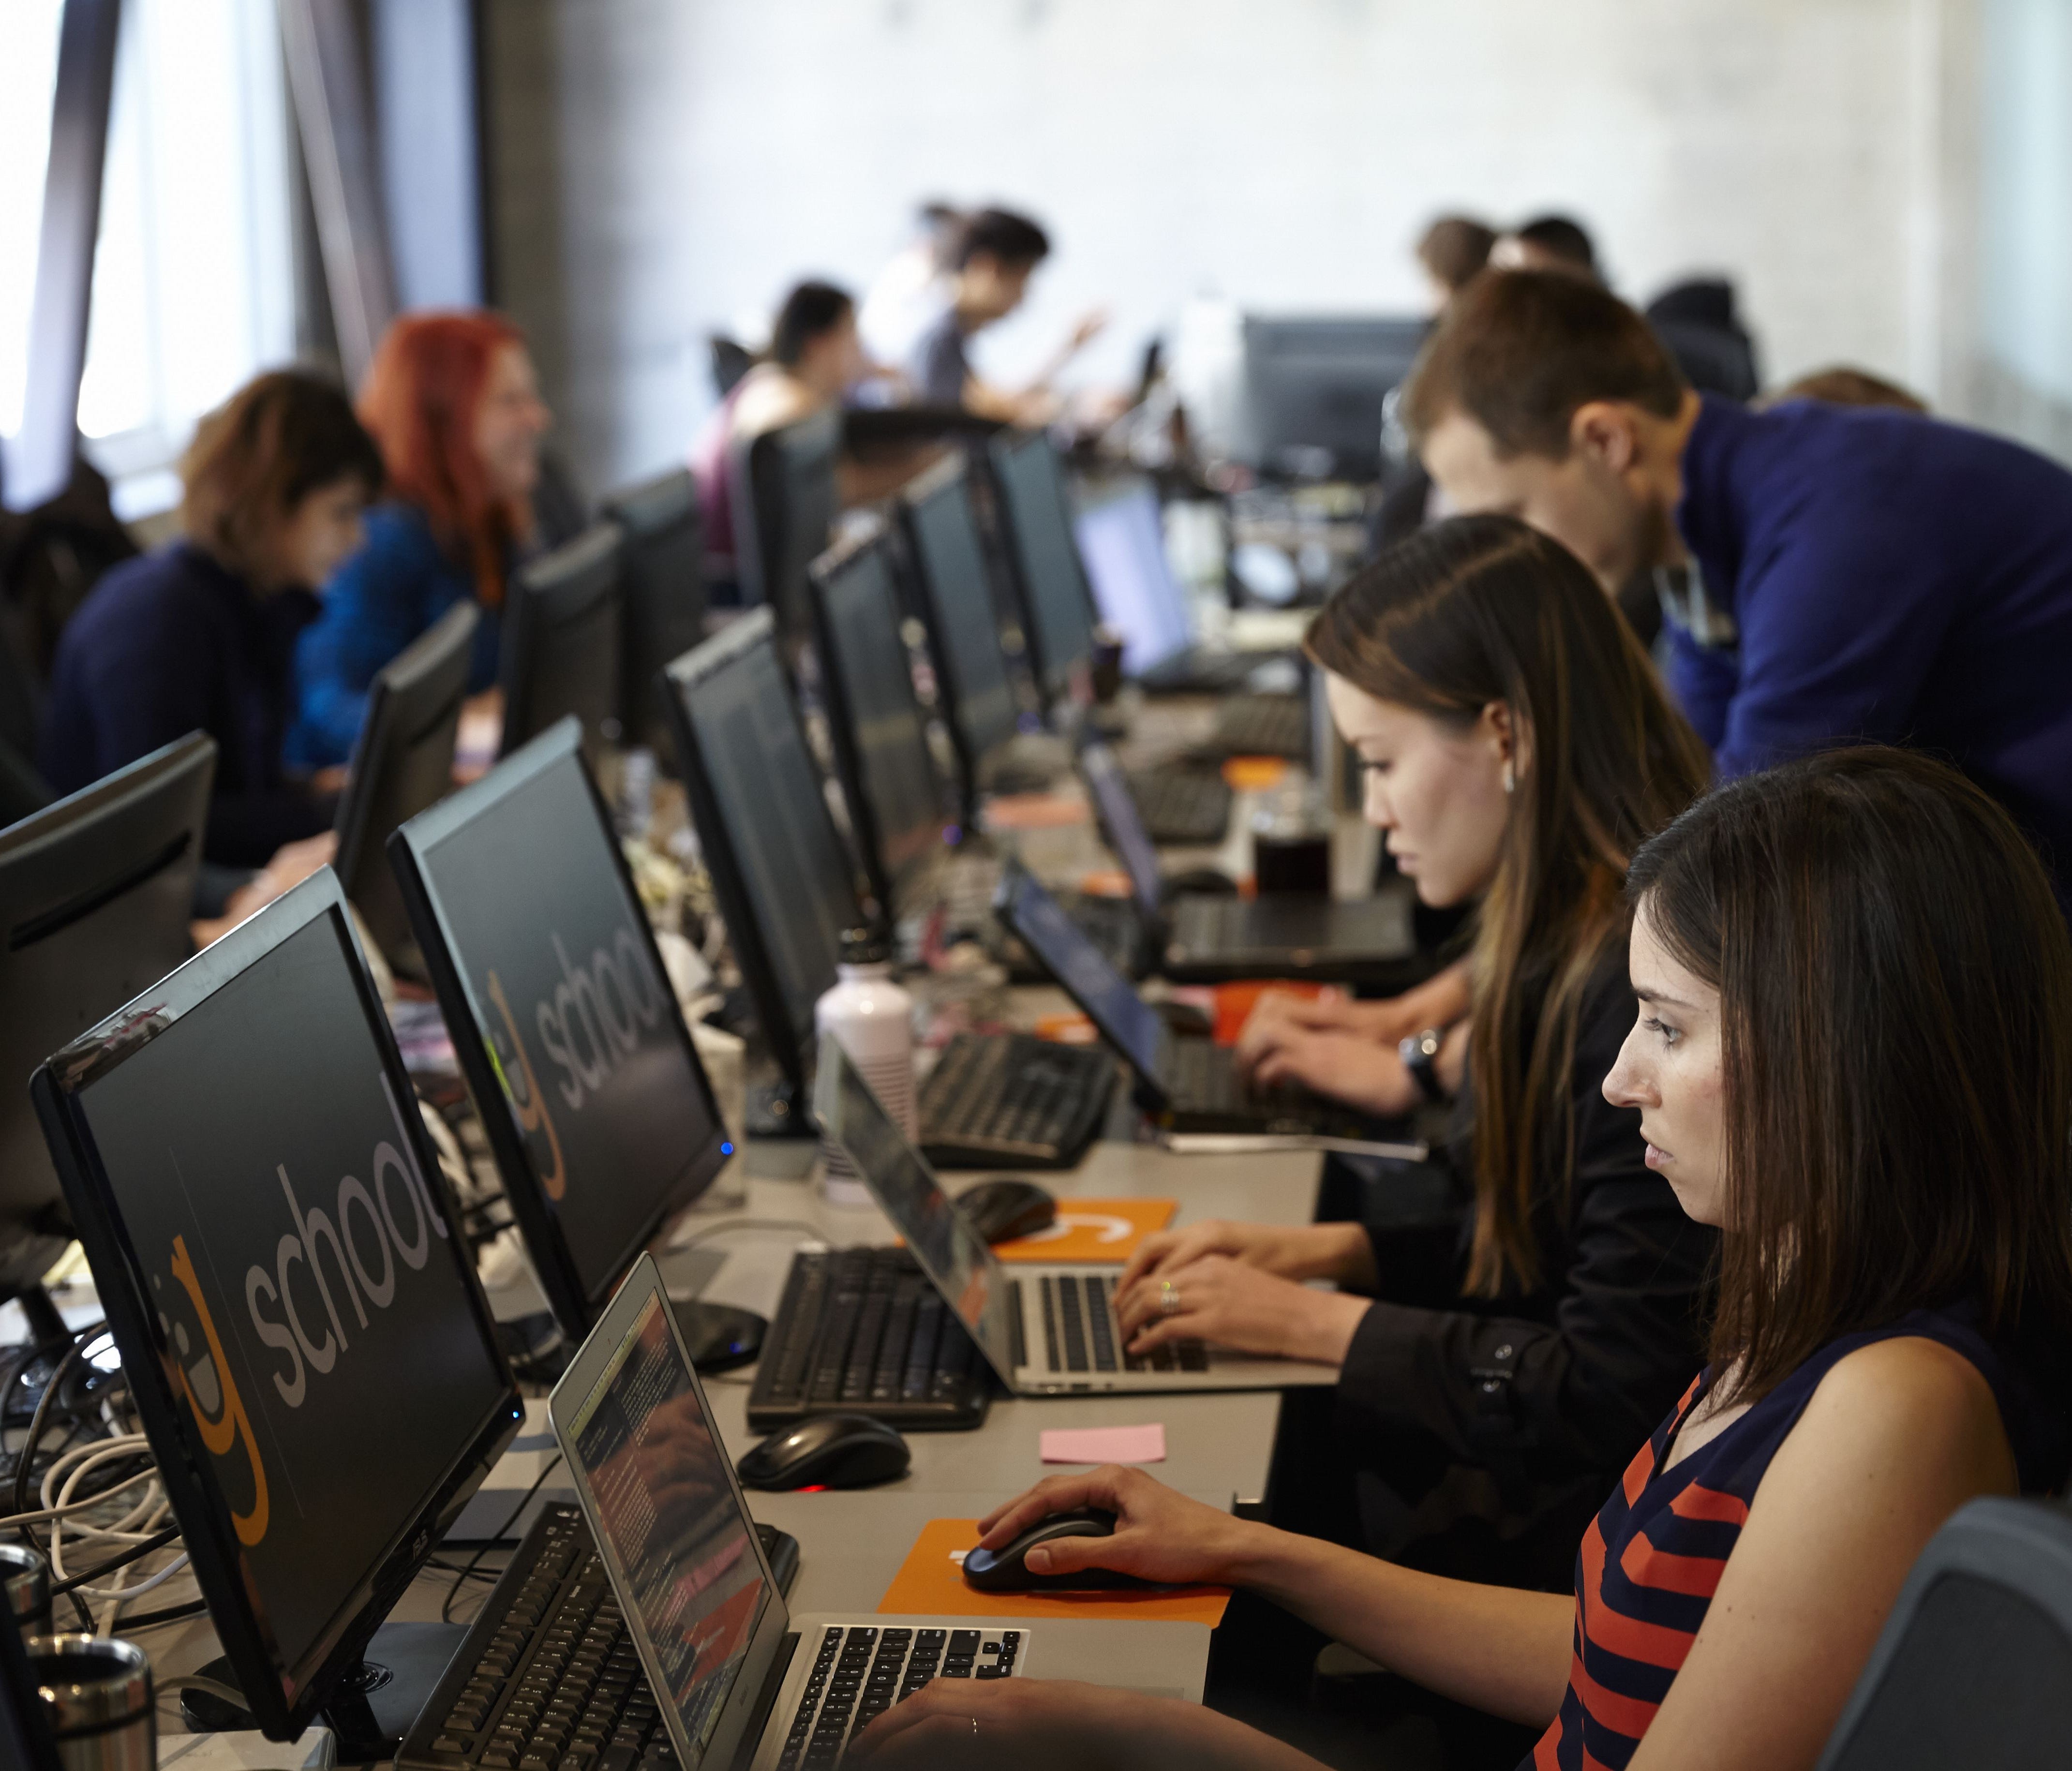 Would-be technology workers learn coding and programming skills at Galvanize, one of a number of new boot camps that help teach skills suited to the tech booming tech economy that has a particular need for data science experts.